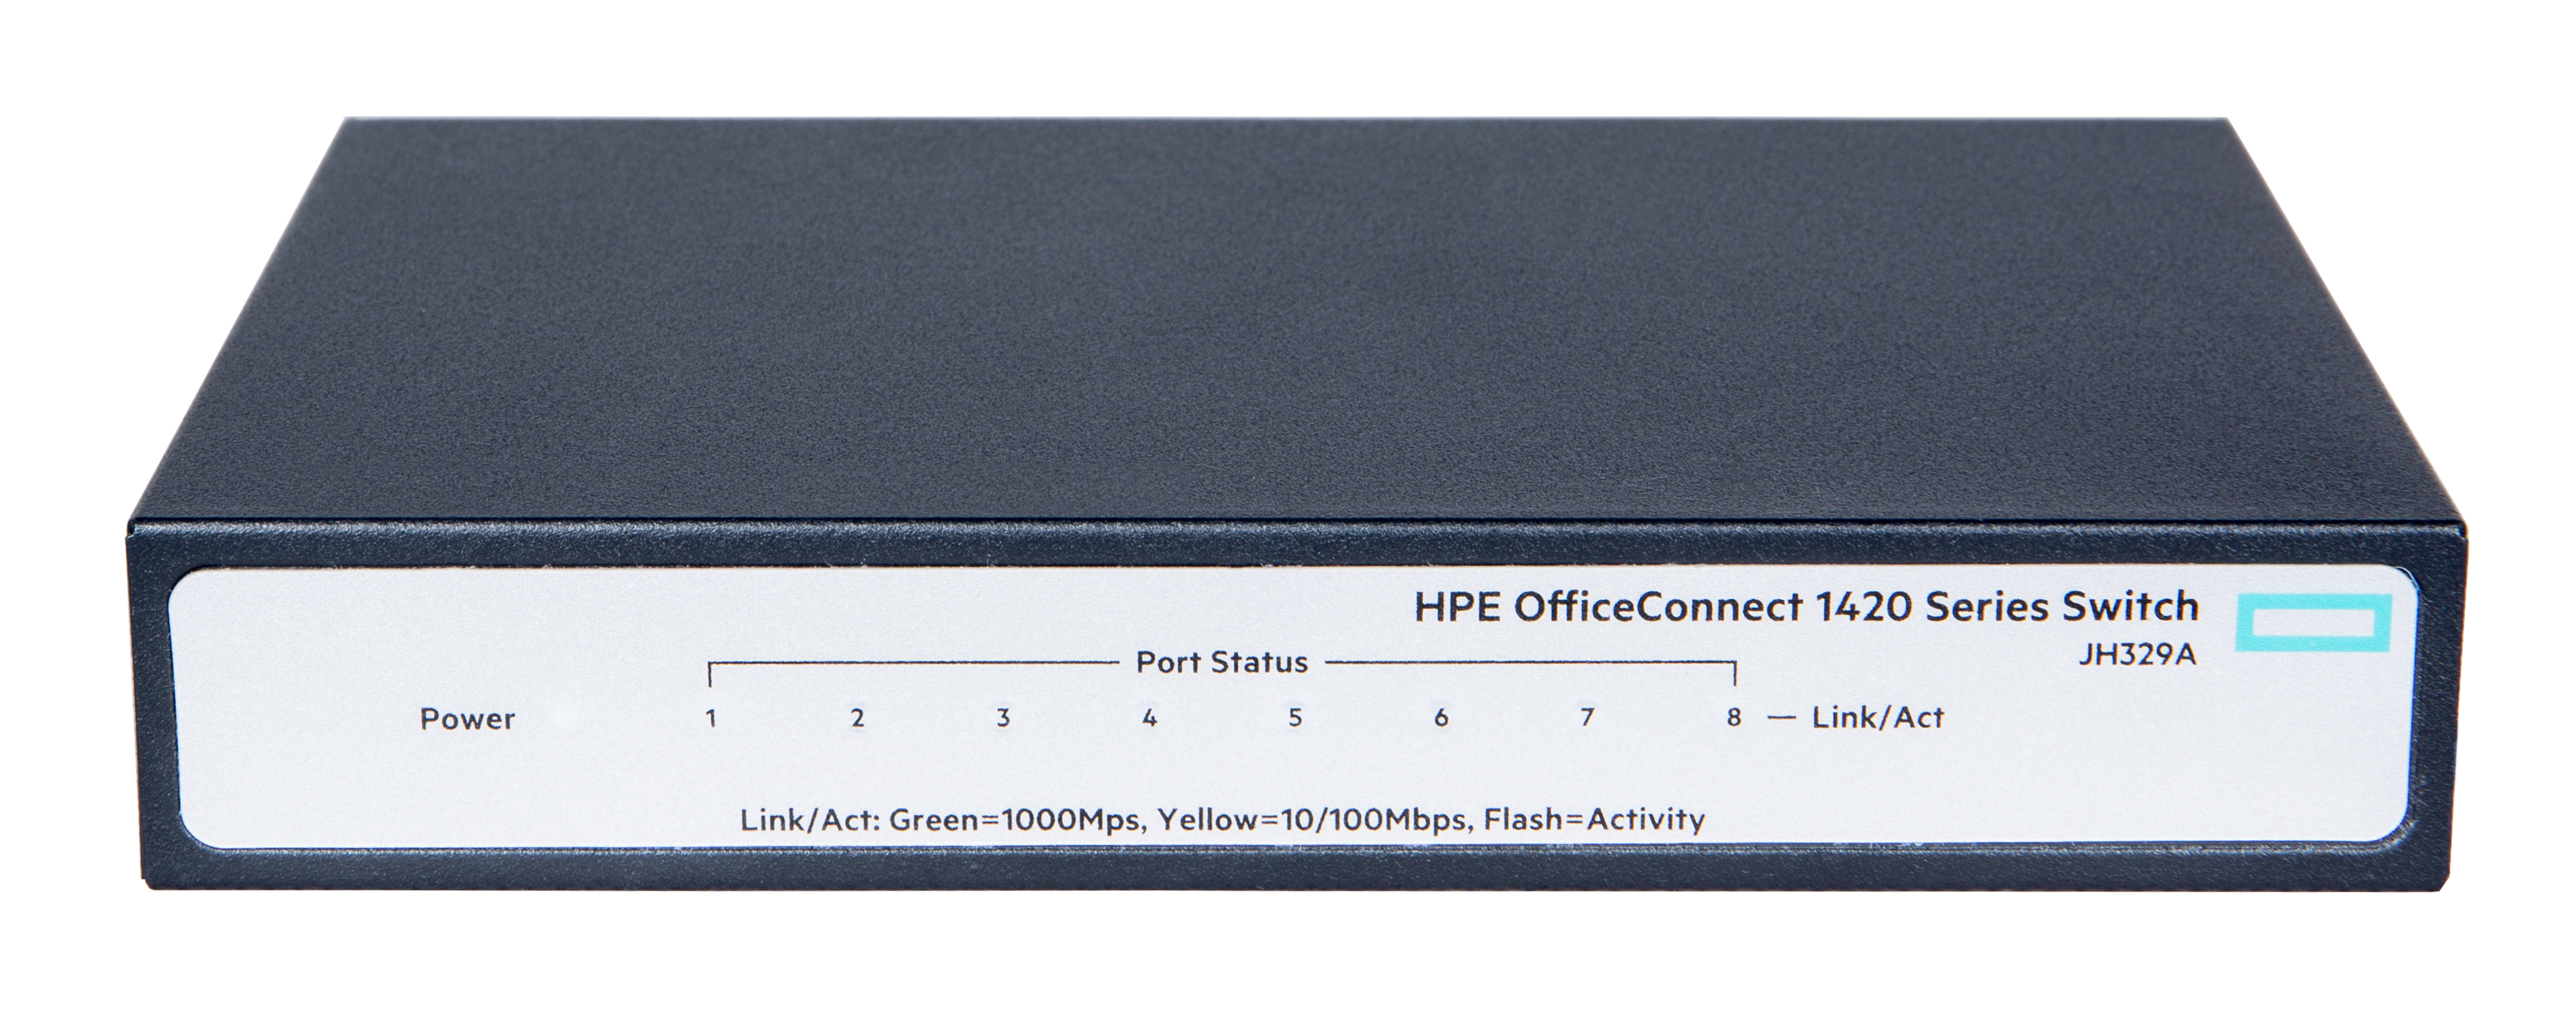 HPE OfficeConnect 1420 8G XCb`